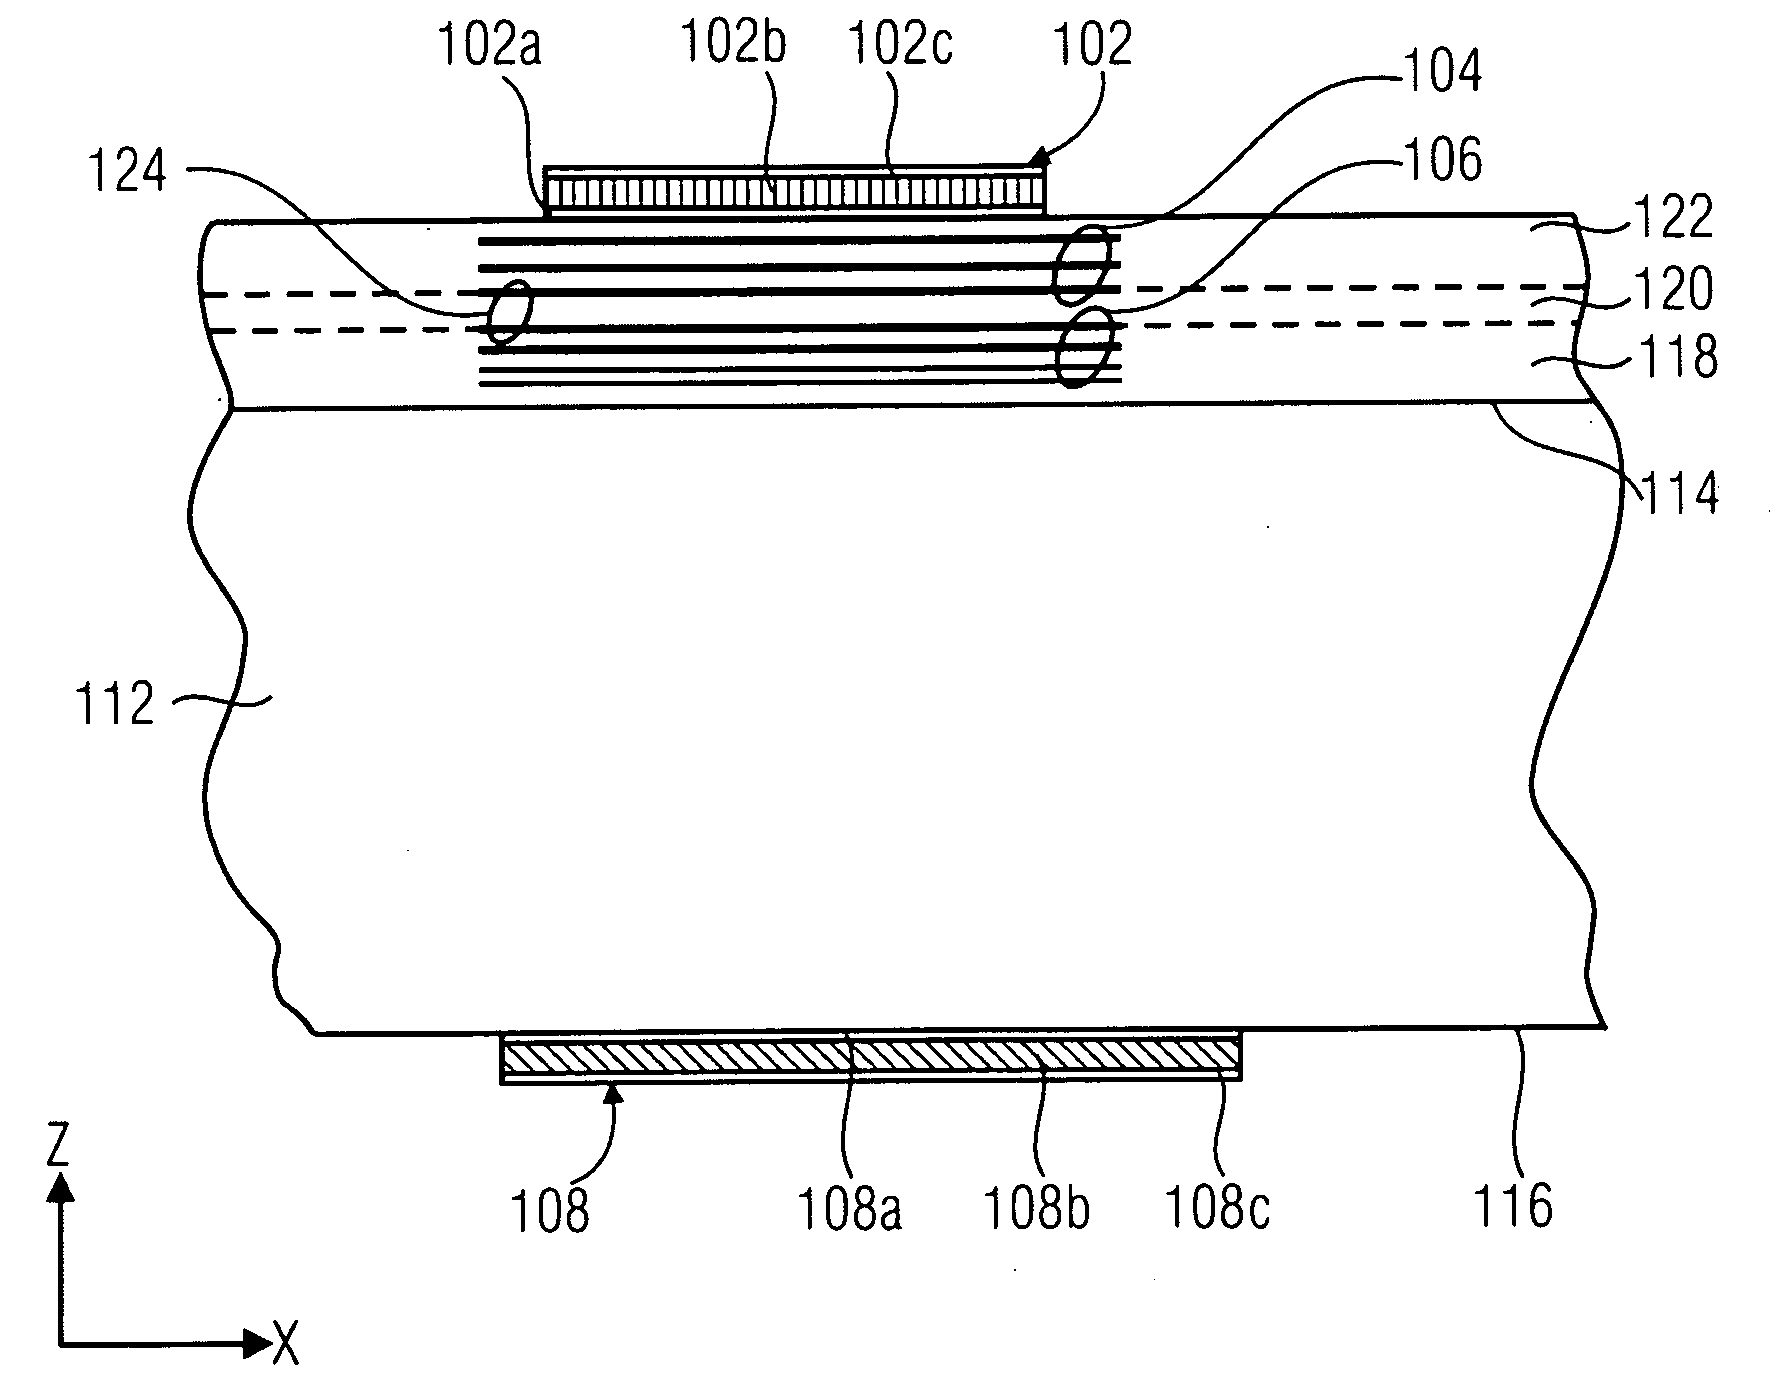 Apparatus and Method for Detecting a Rotation